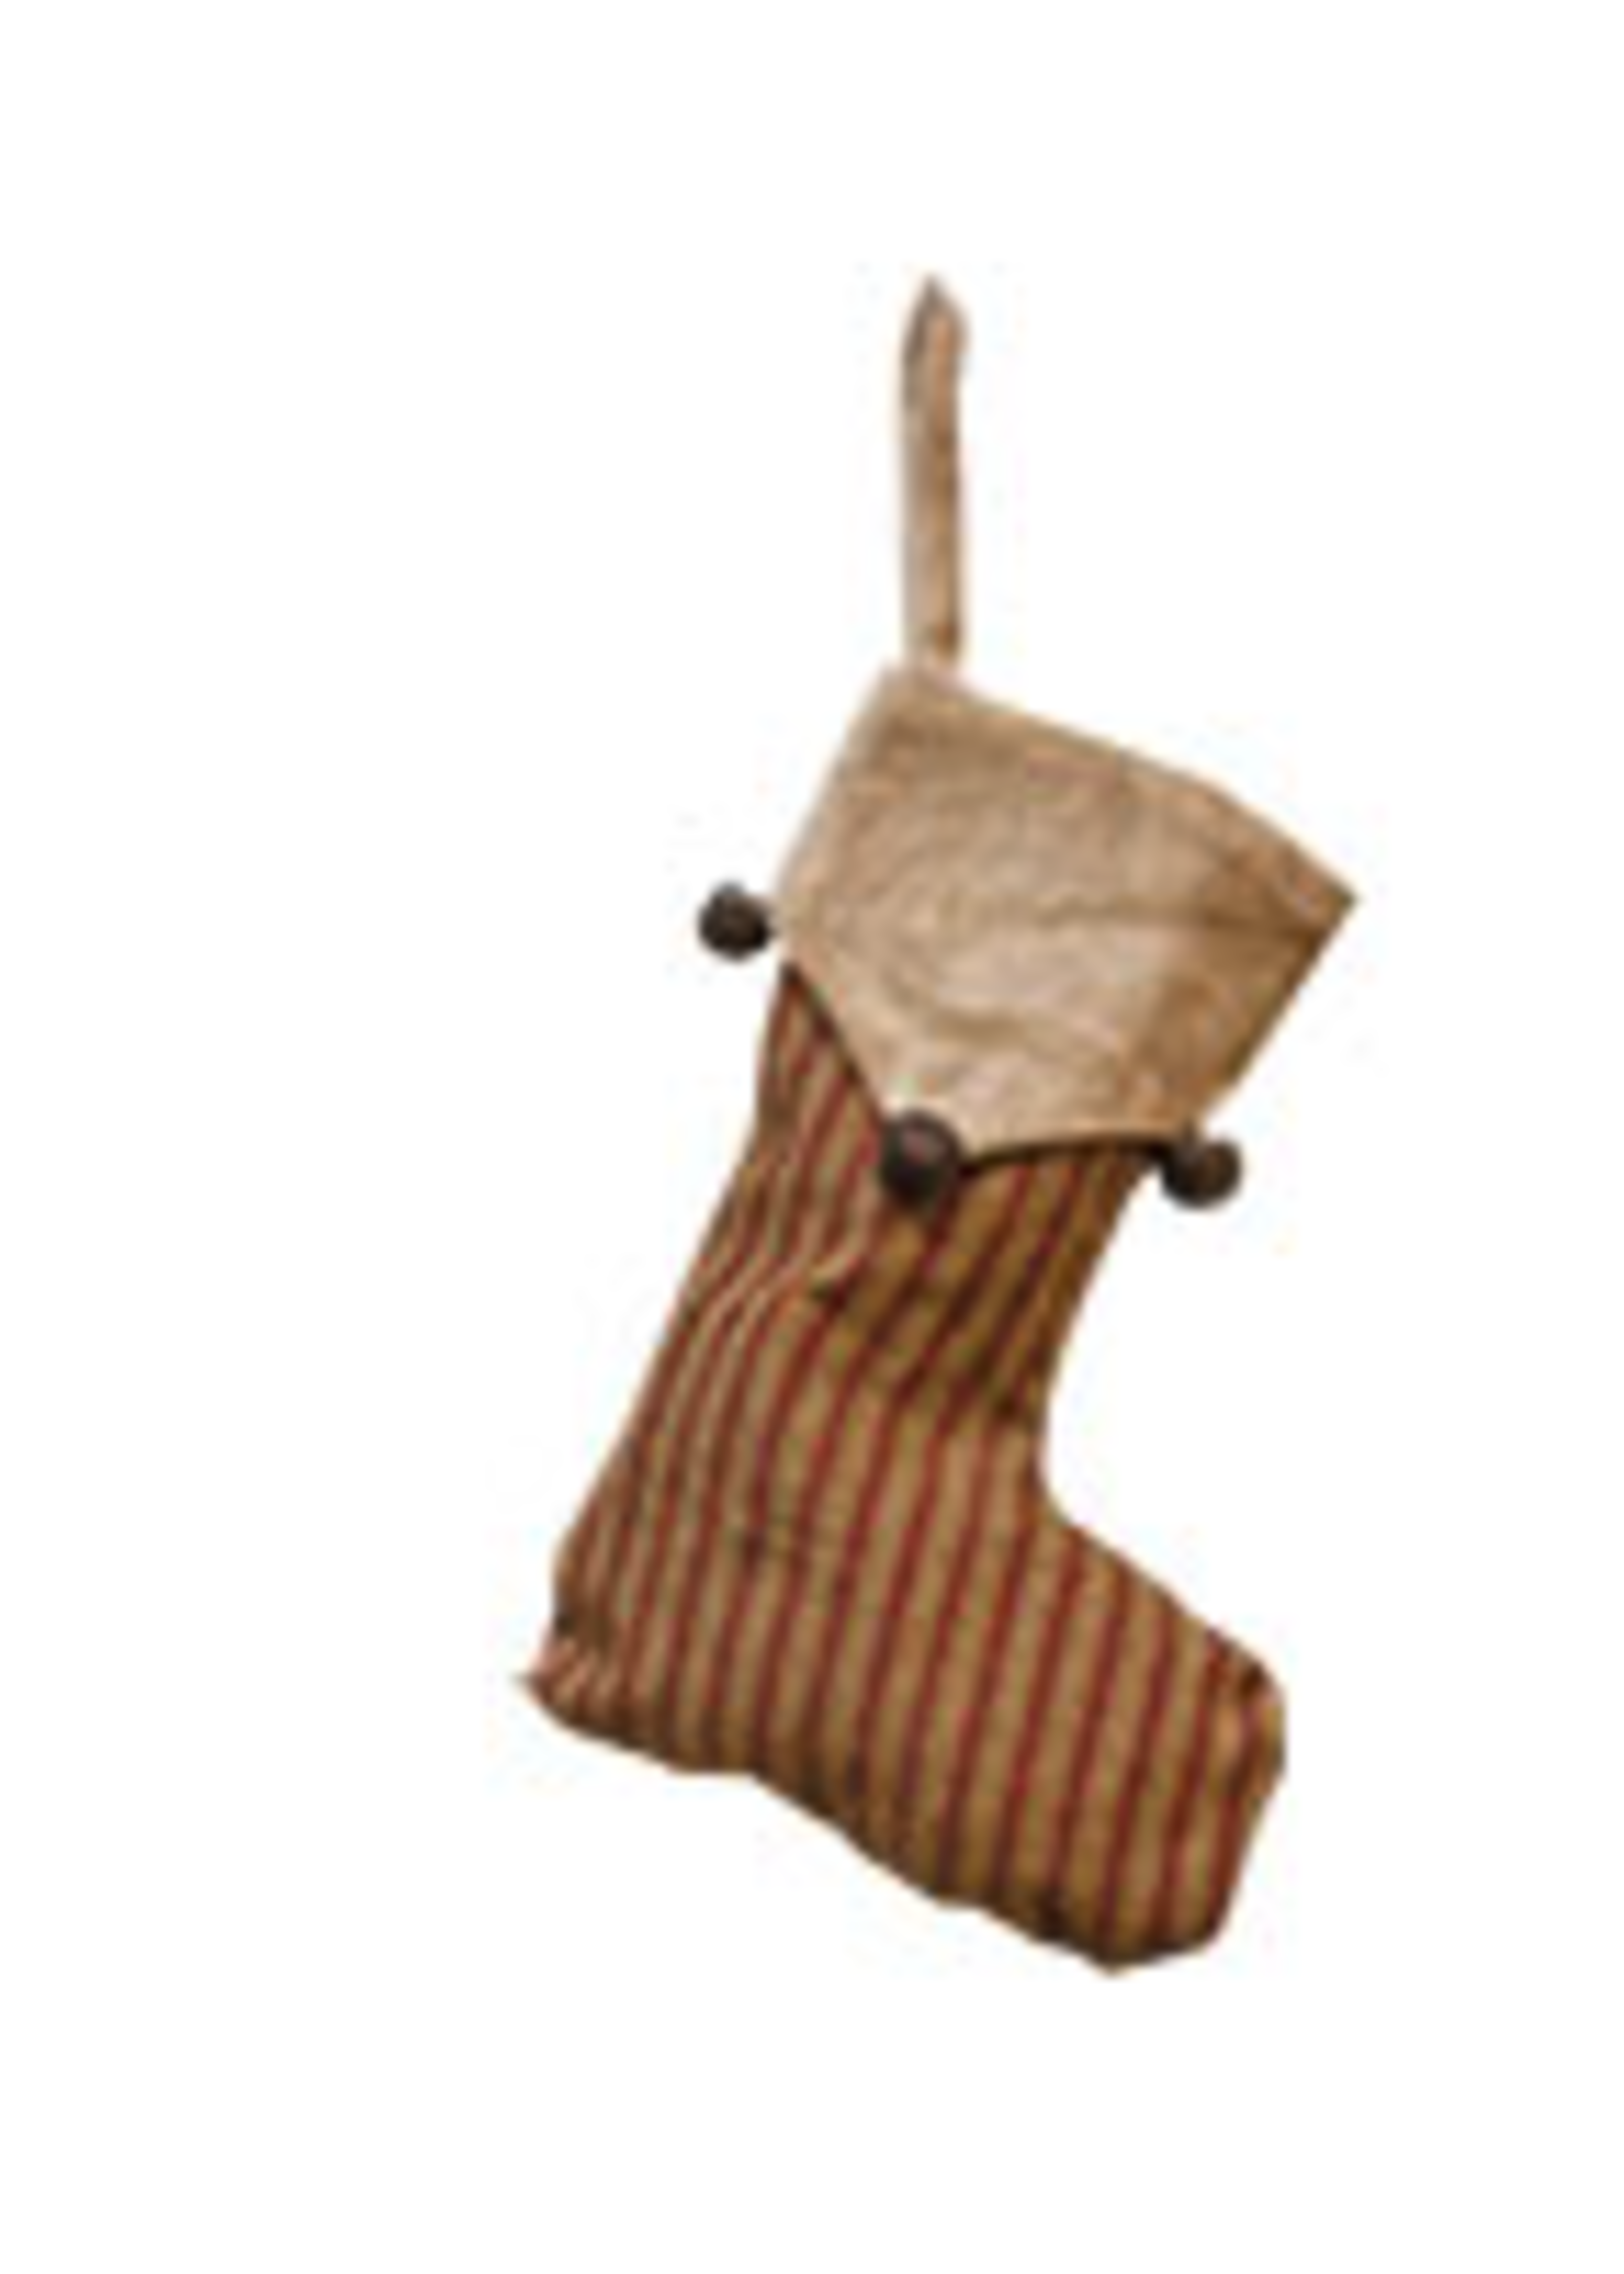 CWI Gifts Rustic Stocking 8"